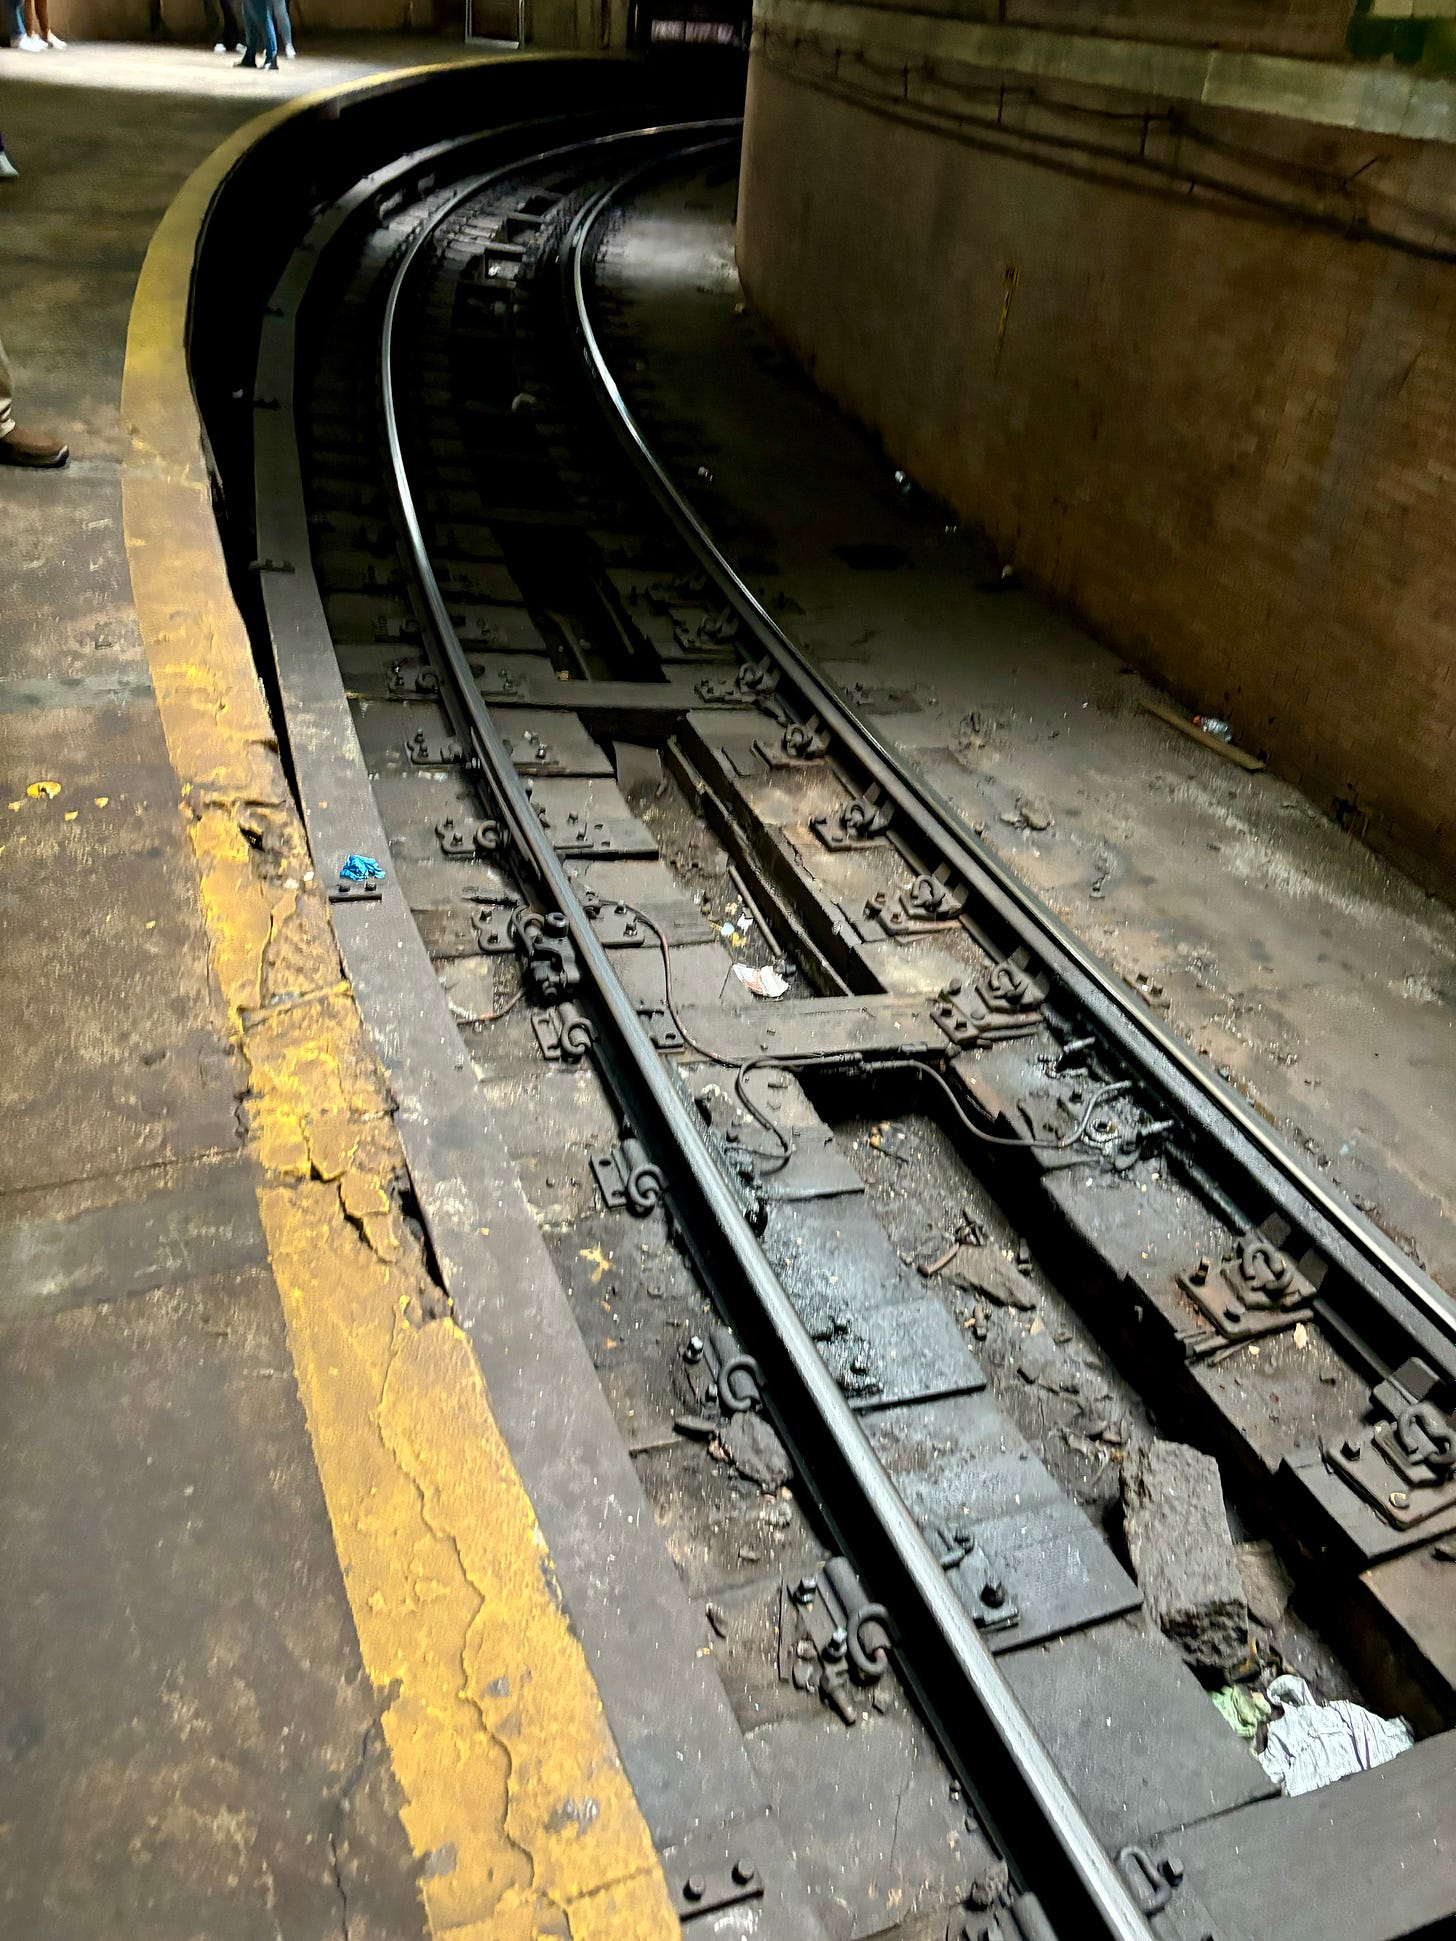 The subway tracks at City Hall Station. The Third Rail is on the side closest to the platform.